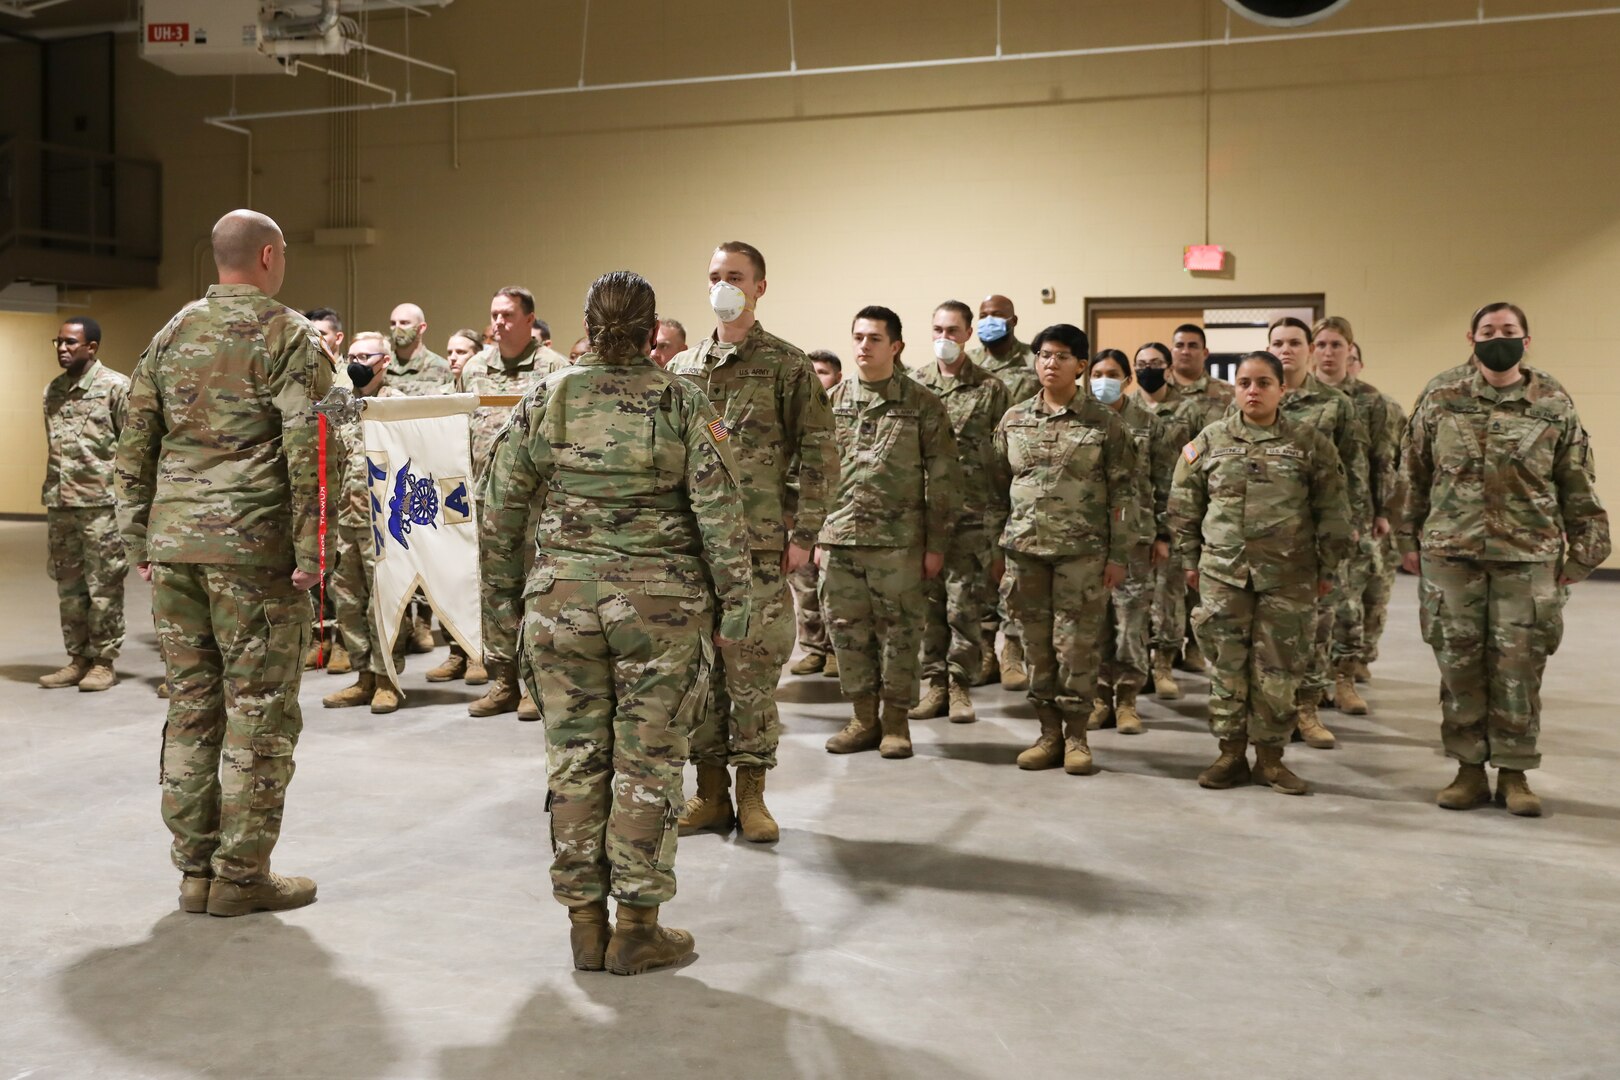 Oklahoma National Guard Soldiers with Alpha Company 777, 345th Combat Sustainment Support Battalion, 90th Troop Command receive a Meritorious Unit Commendation at a ceremony at the Armed Forces Readiness Center, Okmulgee, Oklahoma, Feb. 5, 2022. The unit was awarded the commendation in recognition of their accomplishments during their 2016-2017 deployment to Kuwait in support of Operations Inherent Resolve, Spartan Shield, and Freedom’s Sentinel. (Oklahoma National Guard photo by Spc. Danielle Rayon)